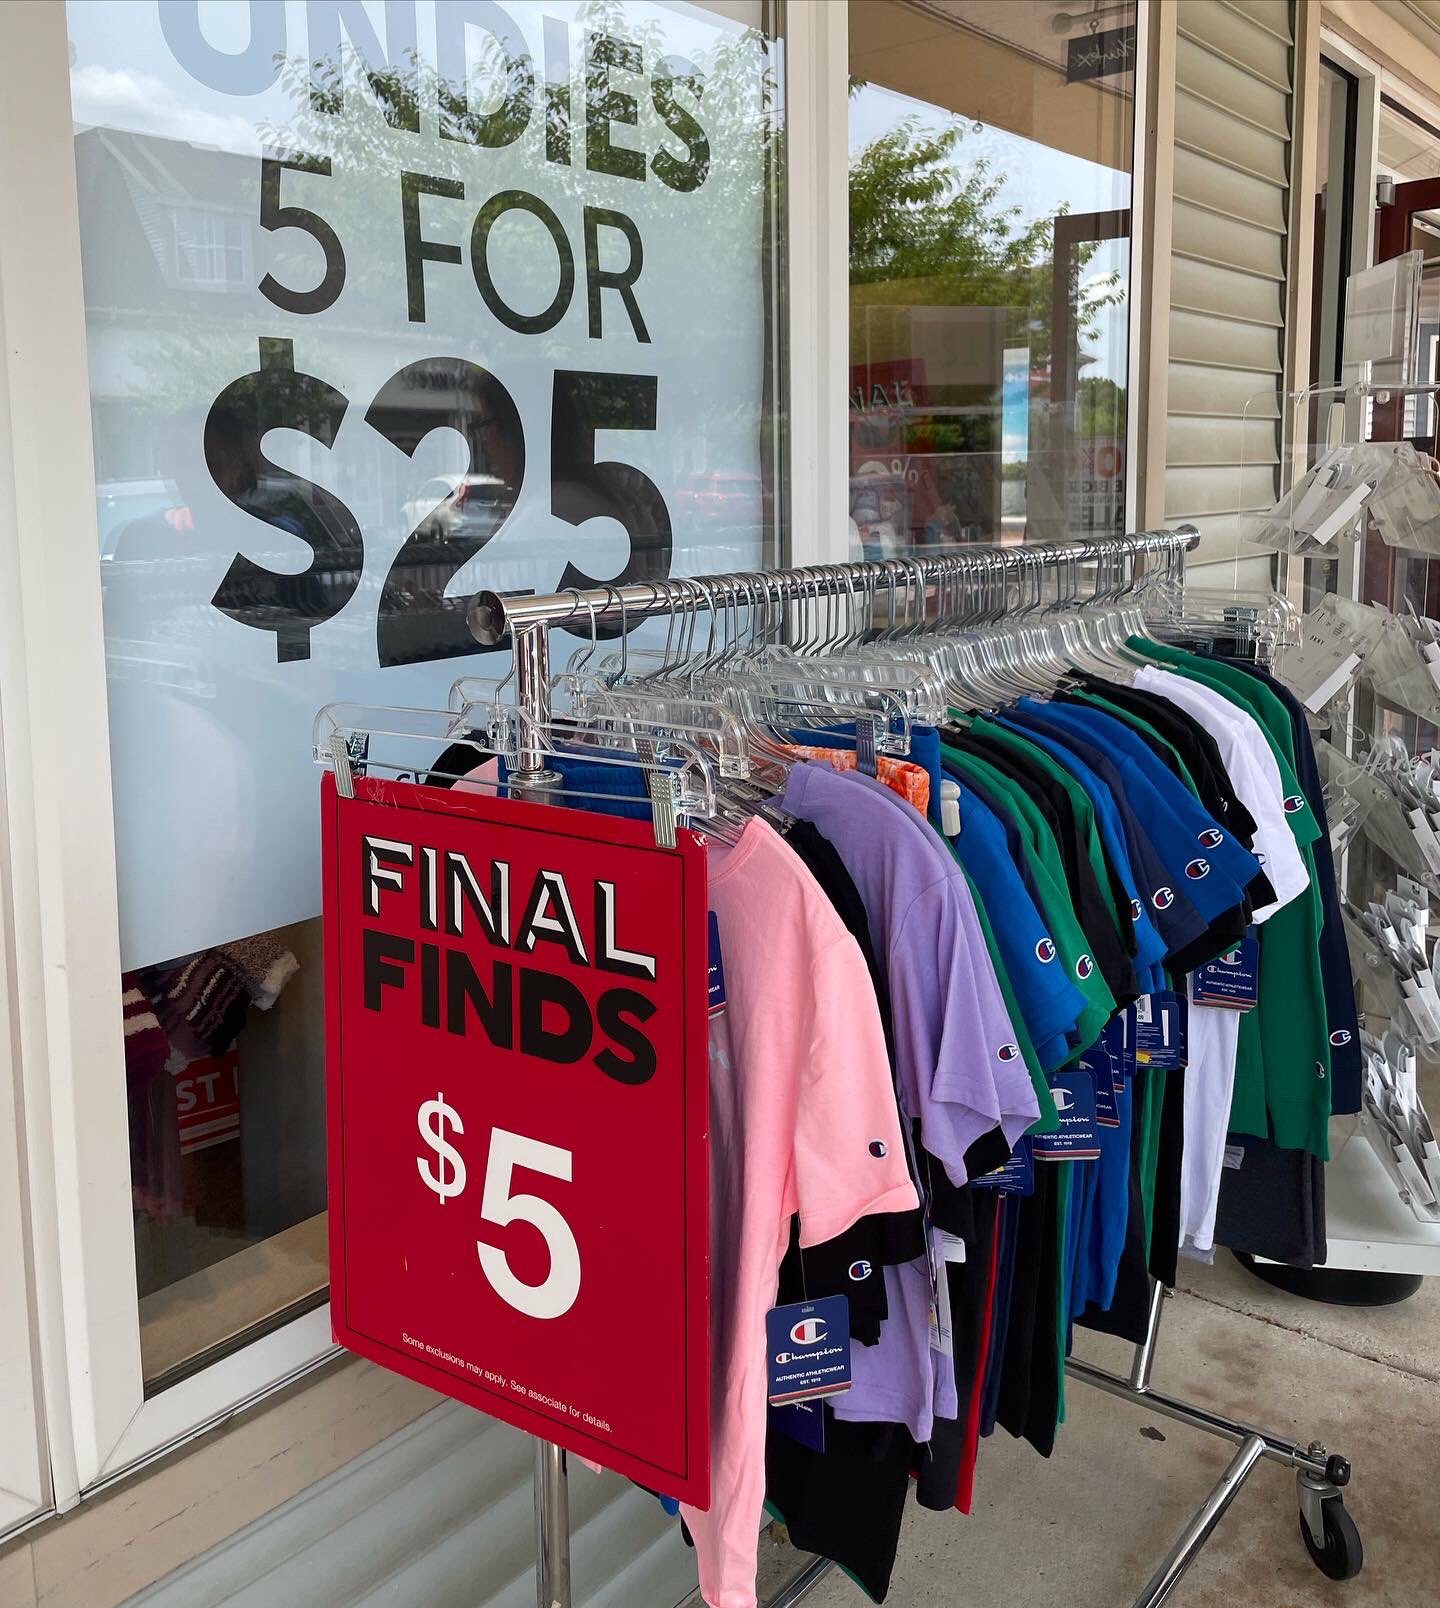 OutletAtGettysburg on X: THE BIG SEMI-ANNUAL SALE AT HANES STARTS